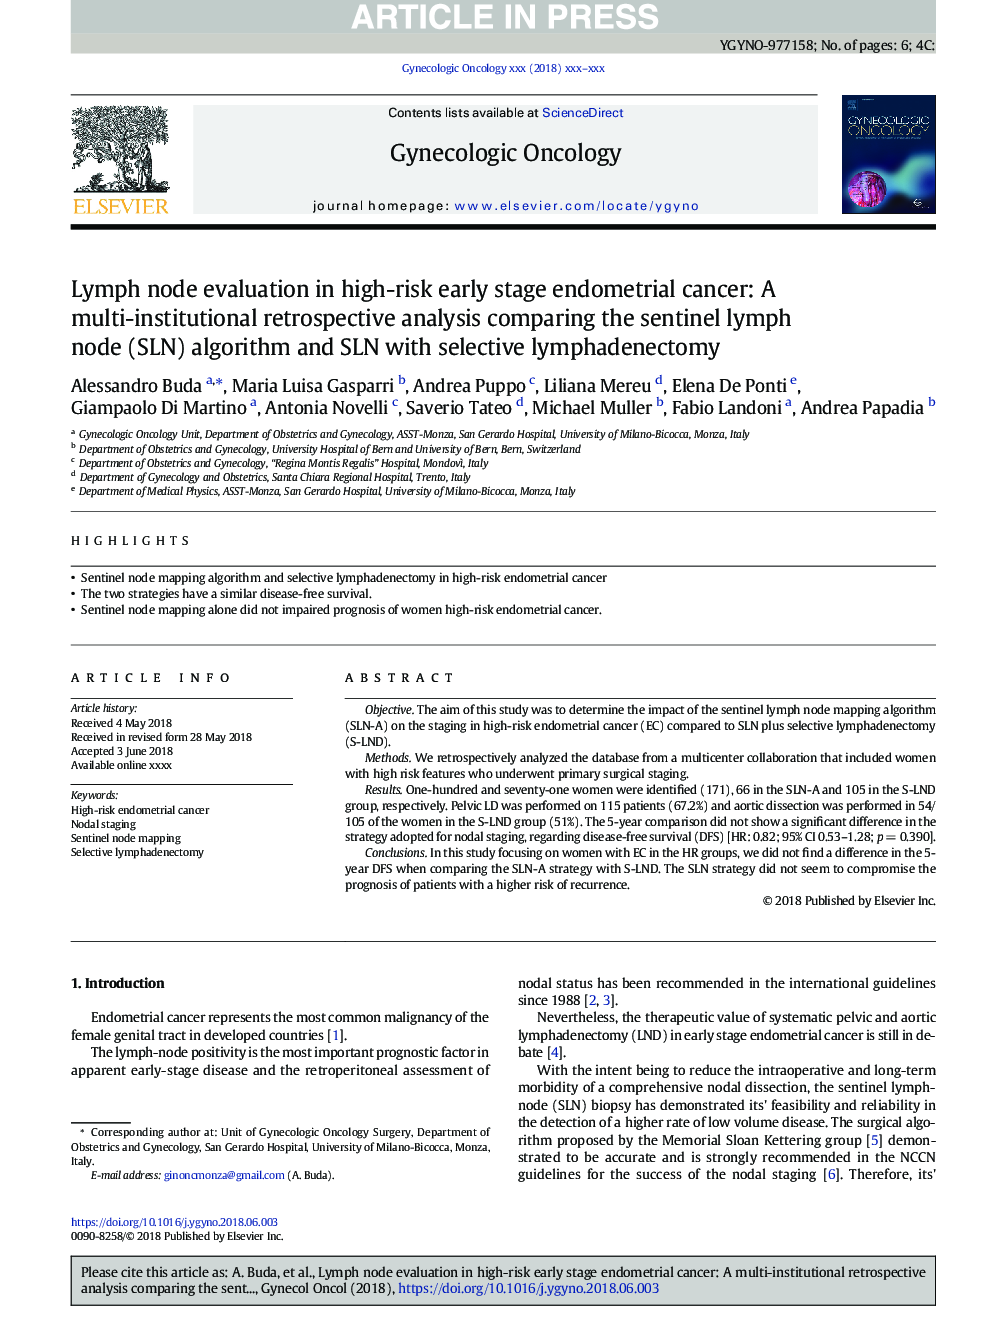 Lymph node evaluation in high-risk early stage endometrial cancer: A multi-institutional retrospective analysis comparing the sentinel lymph node (SLN) algorithm and SLN with selective lymphadenectomy